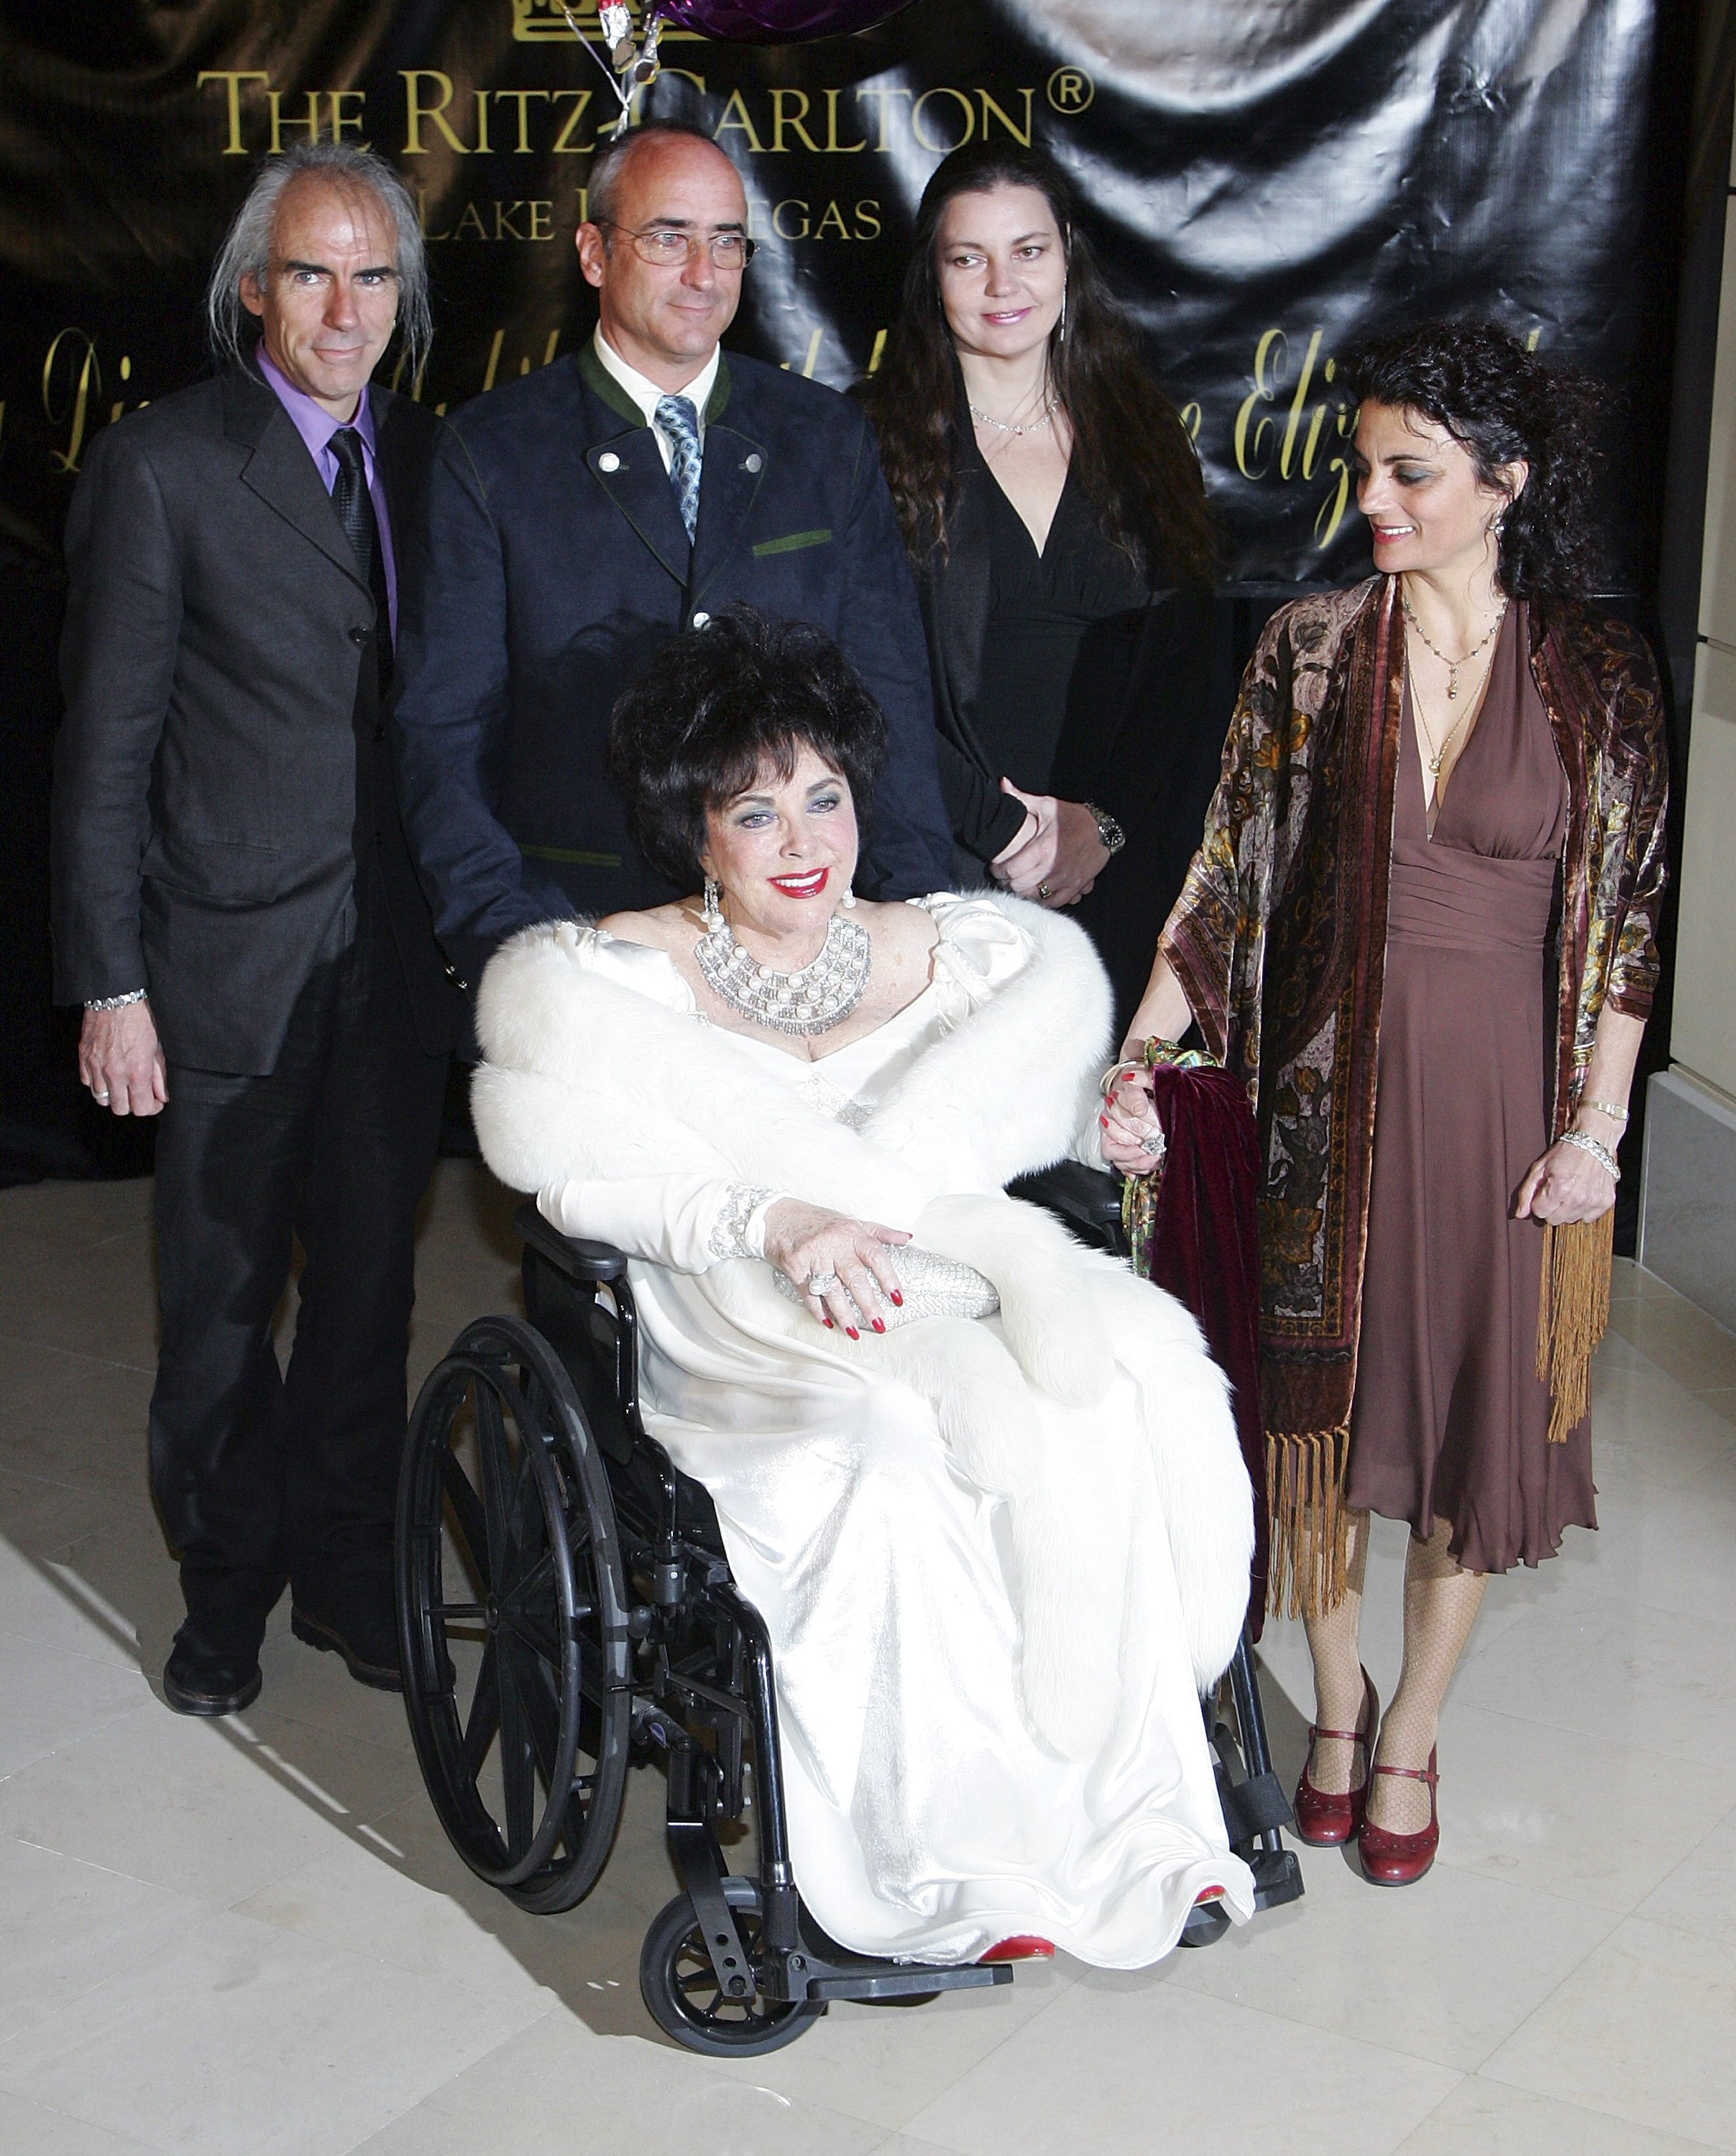 Elizabeth Taylor attends her 75th birthday party with her children (L-R) Michael Wilding Jr., Christopher Wilding, Maria Burton, and Liza Todd at the Ritz-Carlton, Lake Las Vegas on February 27, 2007, in Henderson, Nevada. | Source: Getty Images